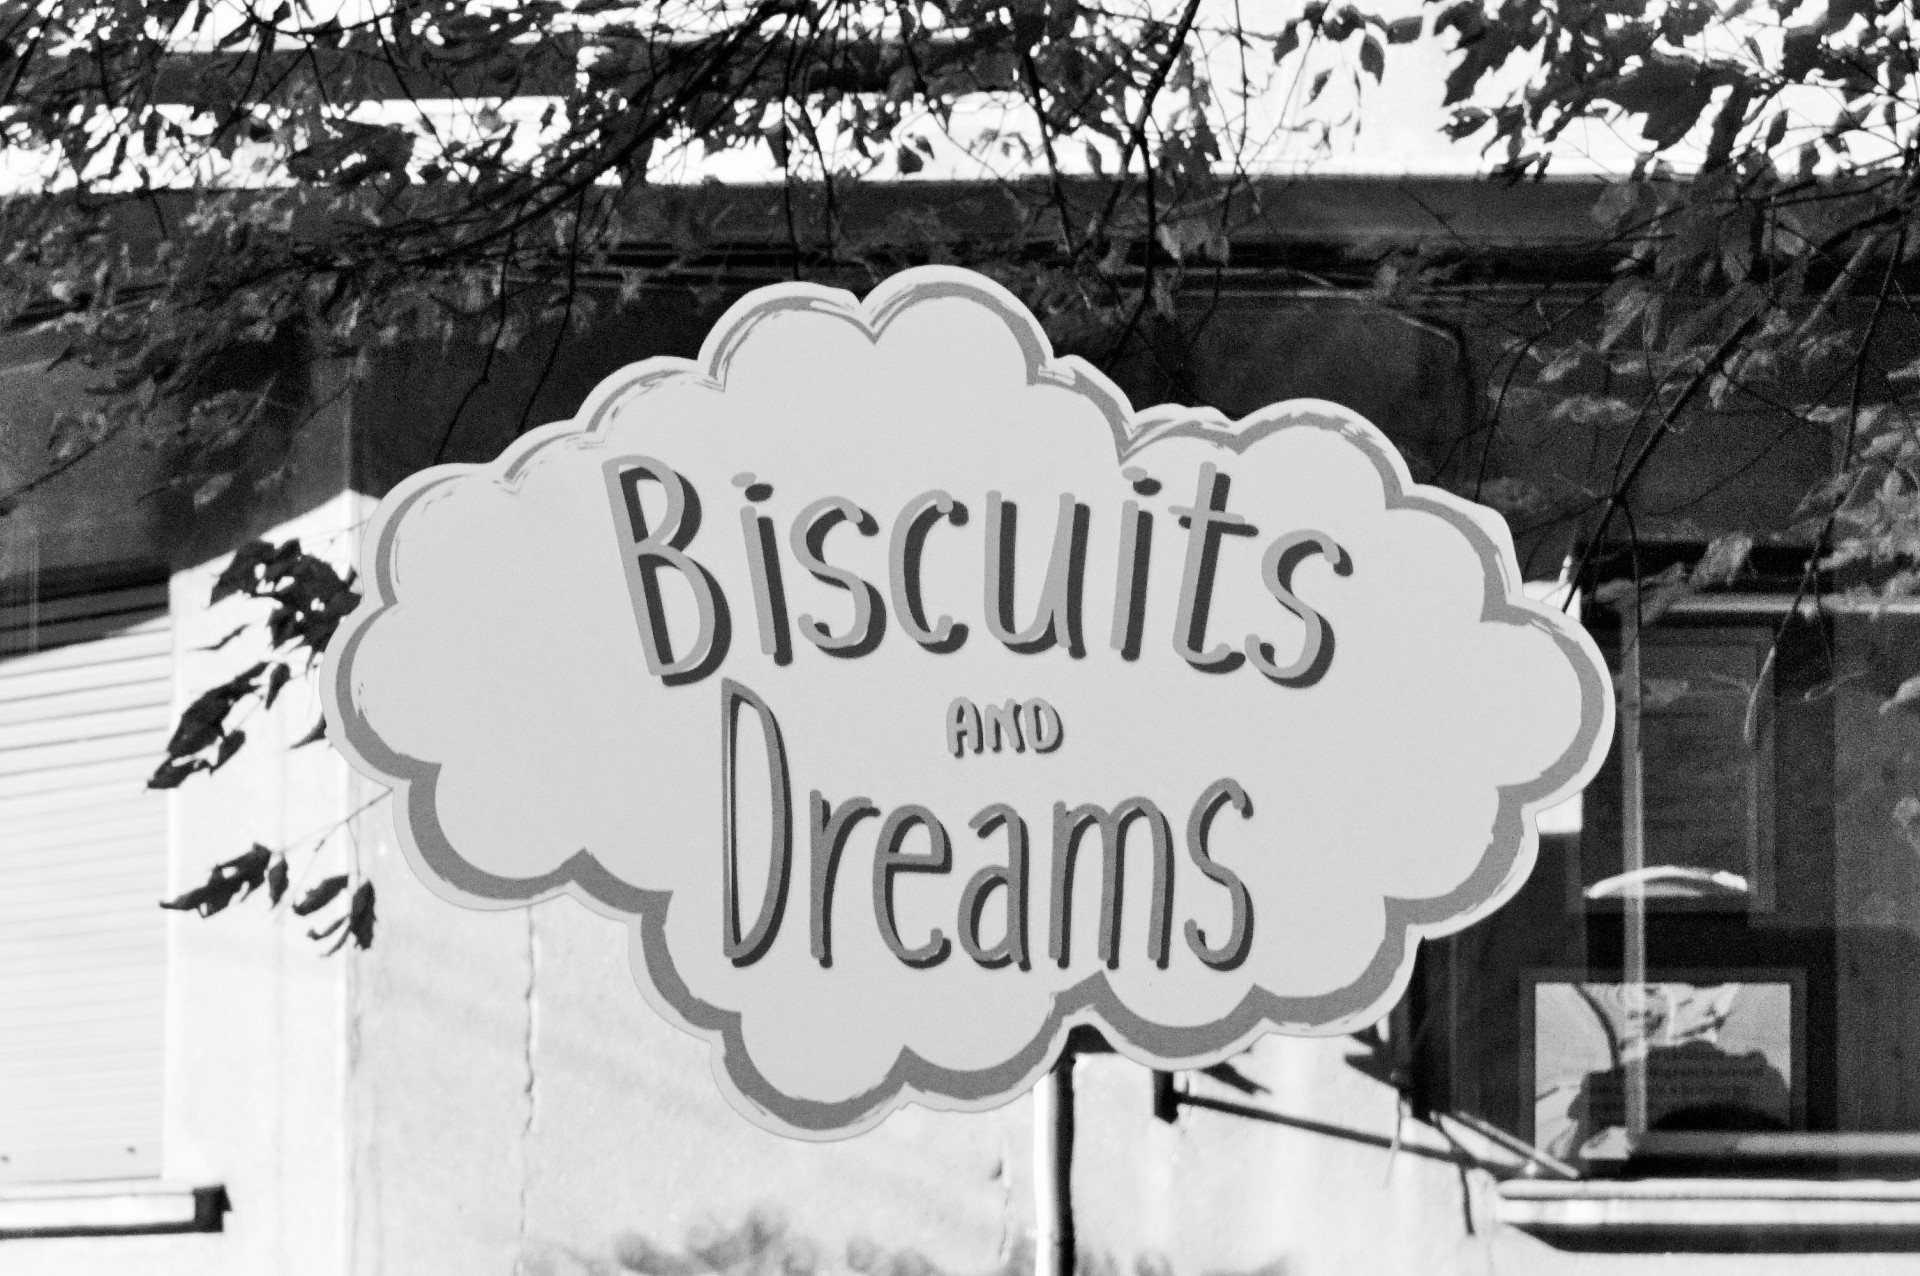 Biscuits in my dreams